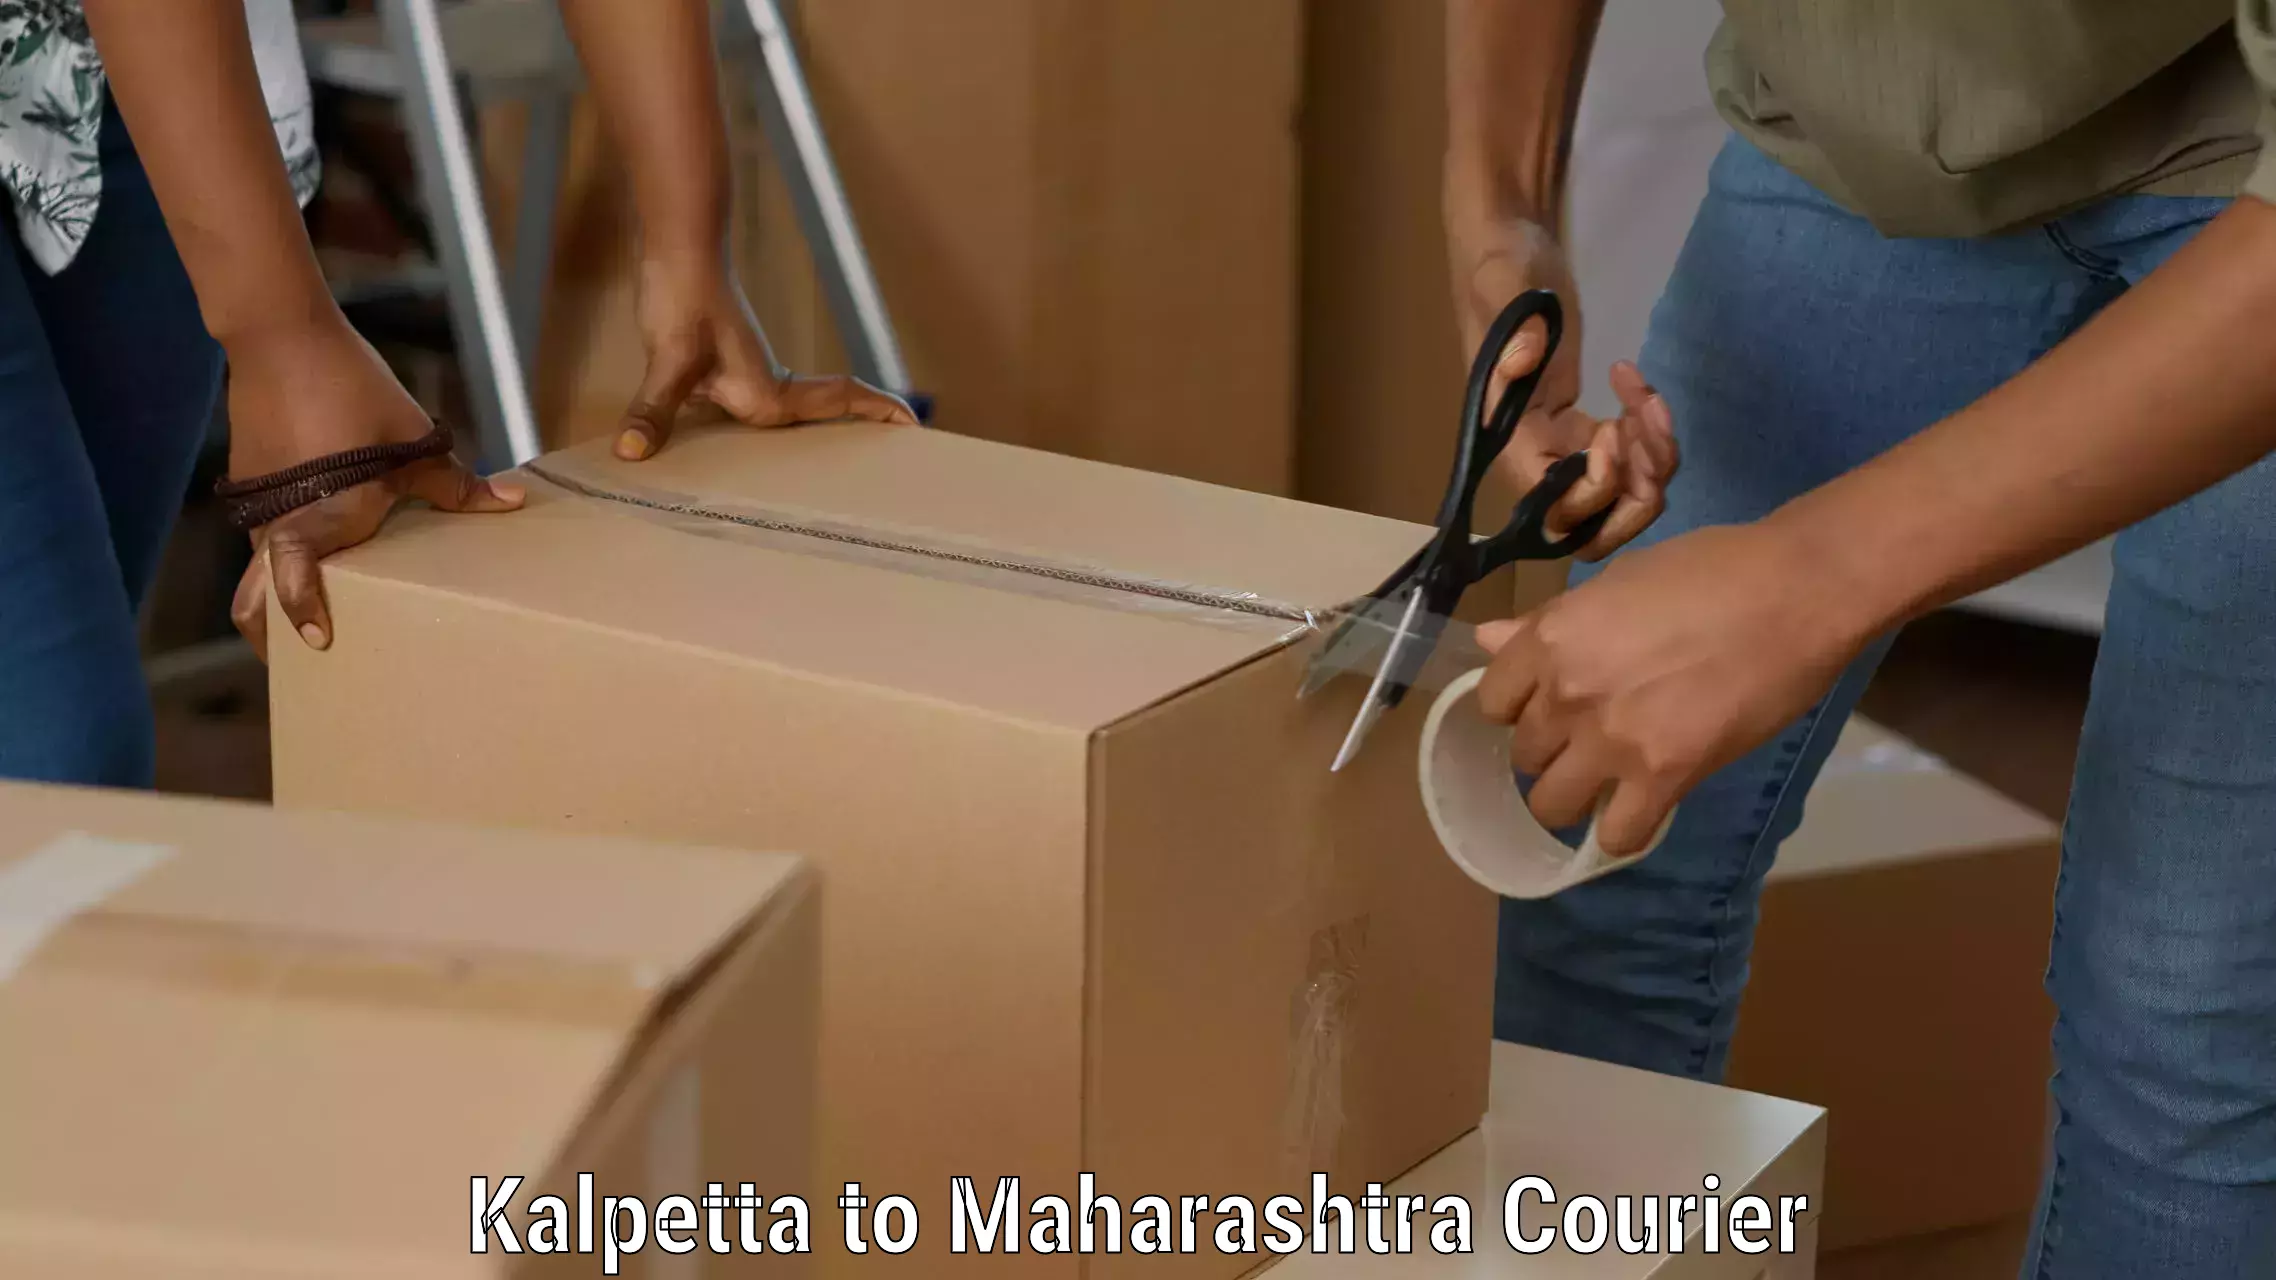 Same-day delivery solutions Kalpetta to Mumbai Port